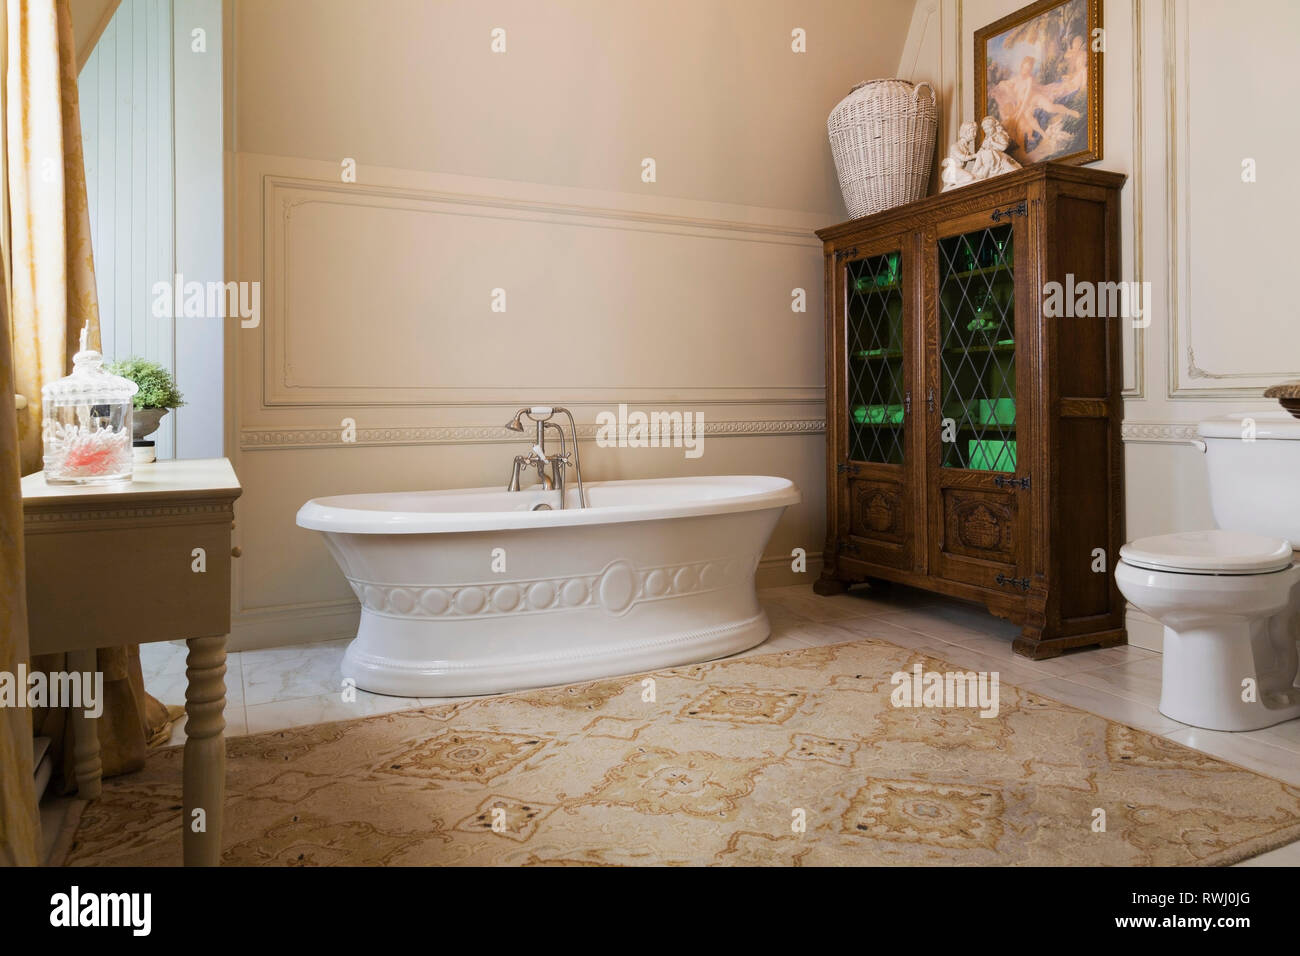 Freestanding boat style bathtub and wooden cabinet with leaded glass panels in the master bathroom on the upstairs floor inside a 2006 reproduction of a 16th century Renaissance castle style residential home, Quebec, Canada Stock Photo